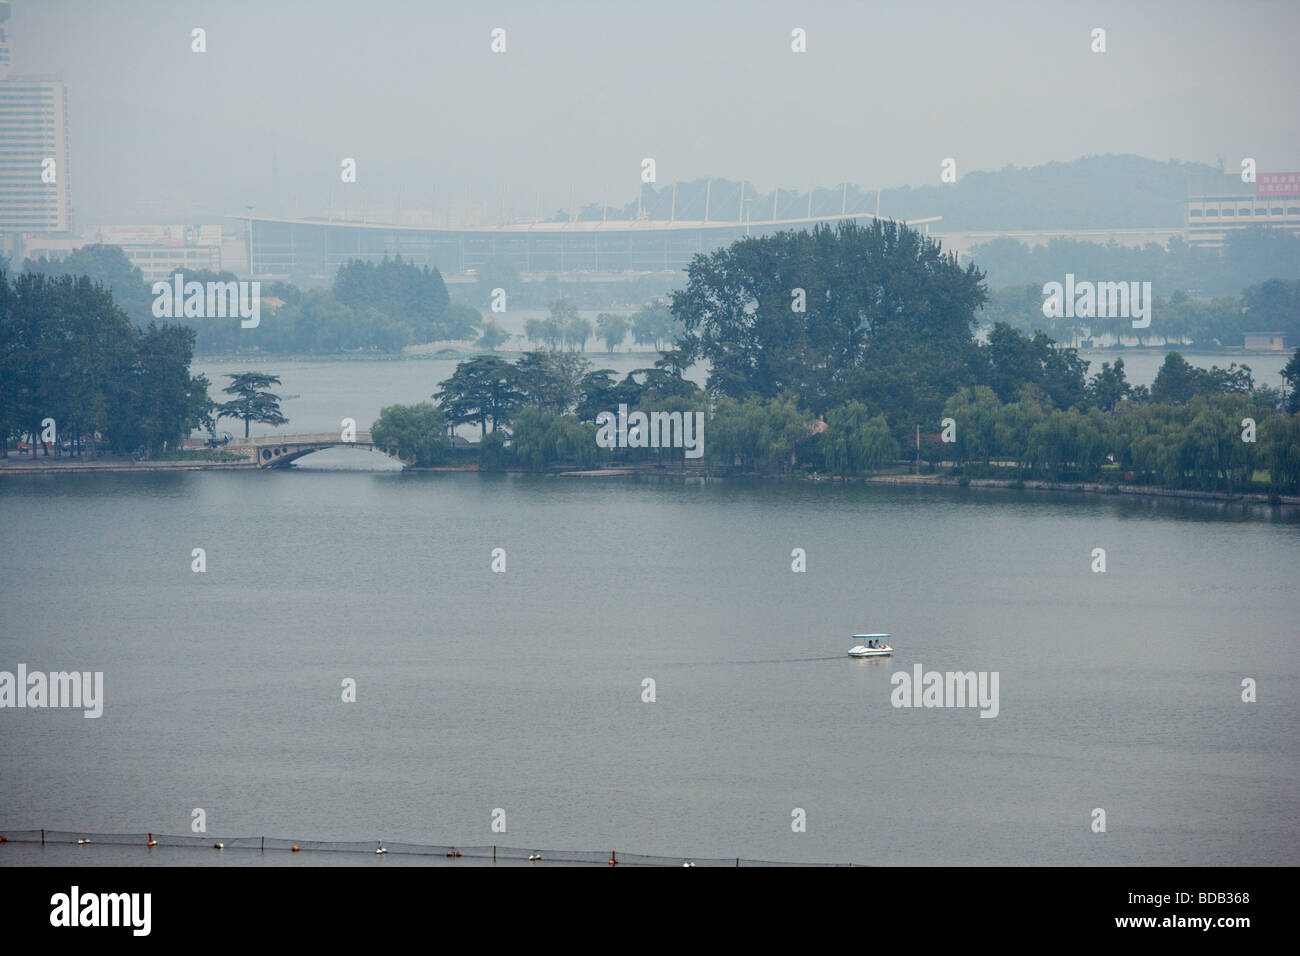 Paddle boat on Xuanwu Lake and Nanjing Station in the haze of polluted air, Nanjing China Stock Photo